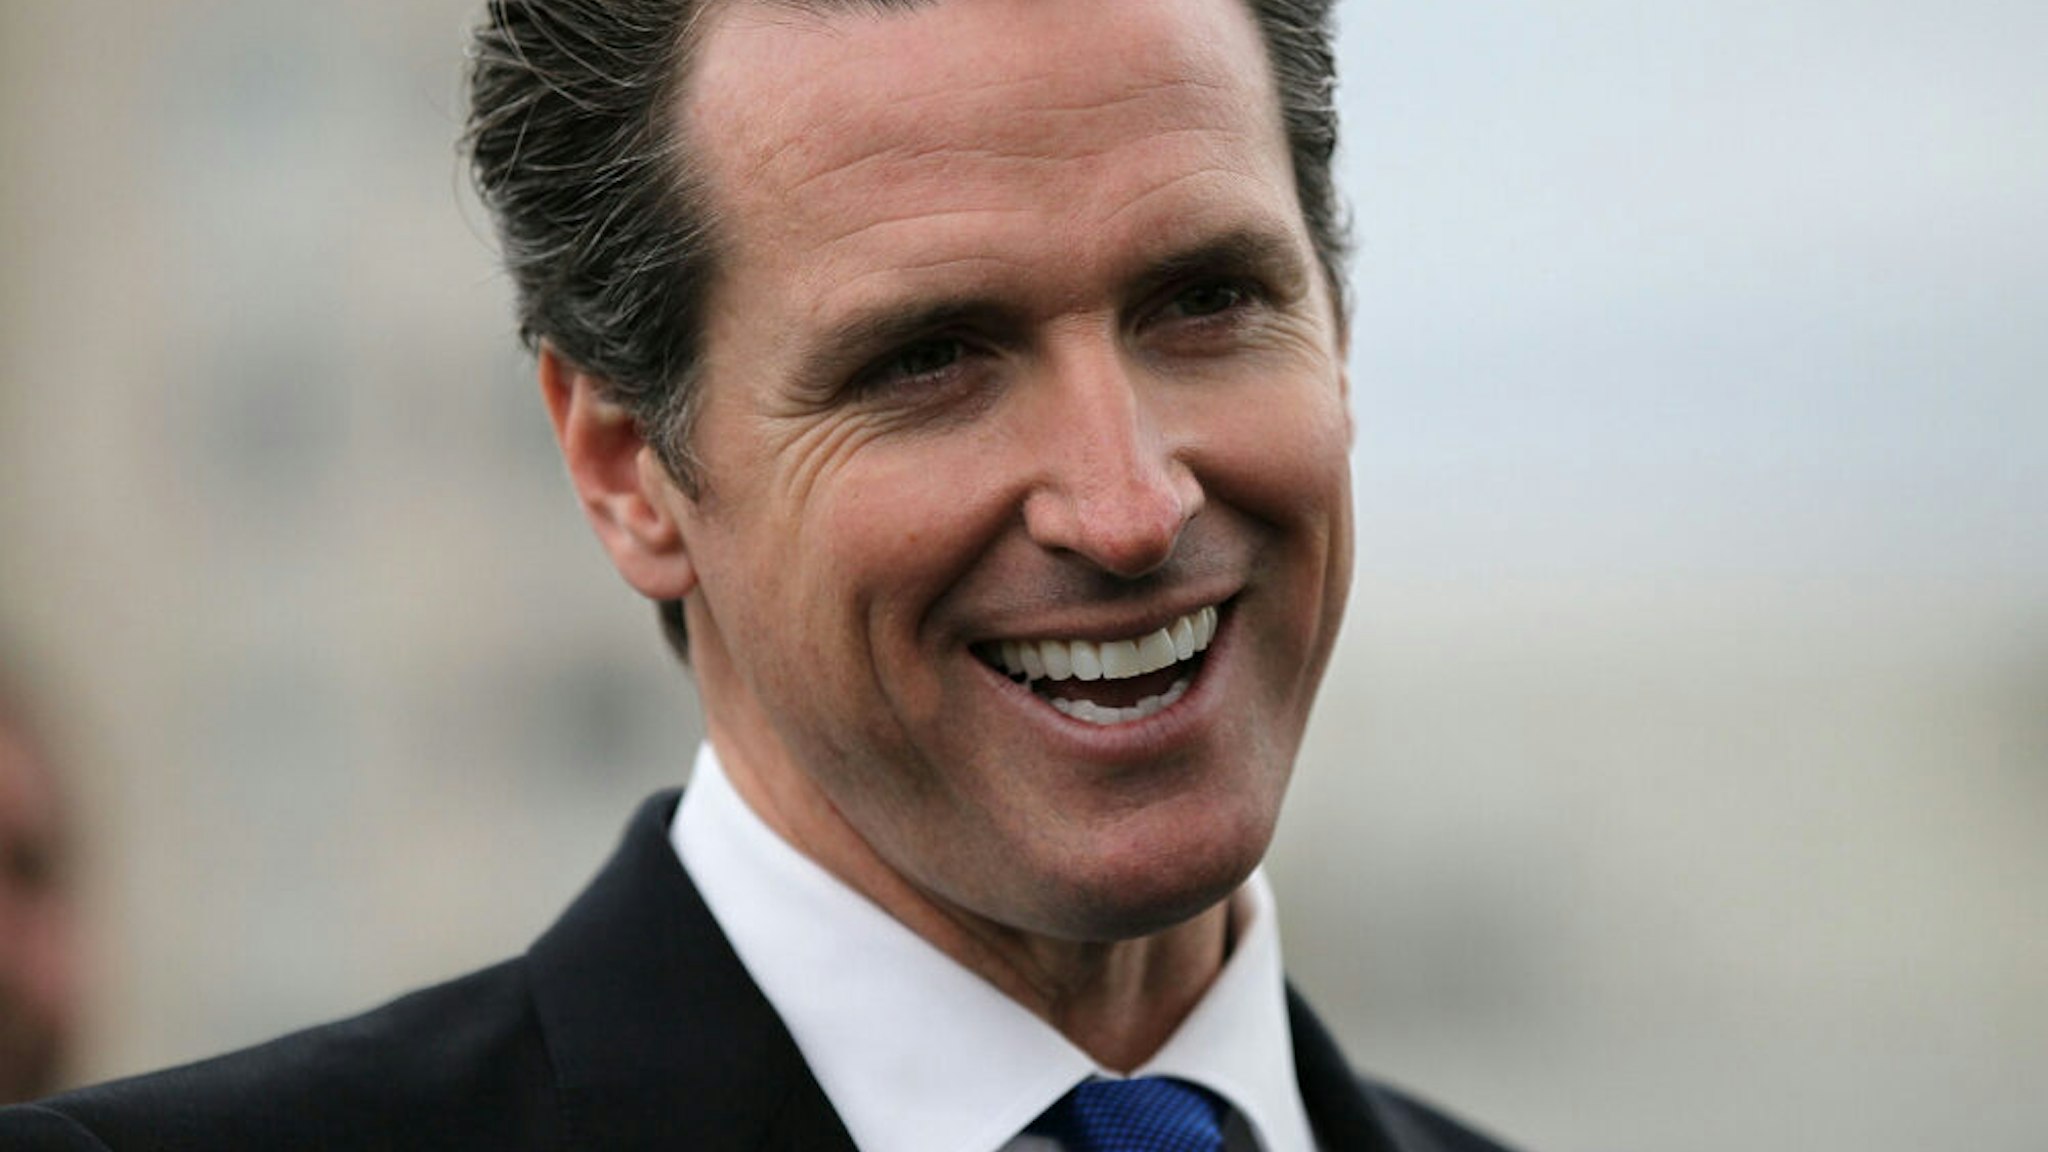 SAN FRANCISCO - MAY 25: San Francisco mayor Gavin Newsom smiles during a news conference May 25, 2010 in San Francisco, California. Mayor Newsom signed fee deferment legislation that will stimulate development and and generate construction jobs by allowing developers to defer upfront city development impact fees.